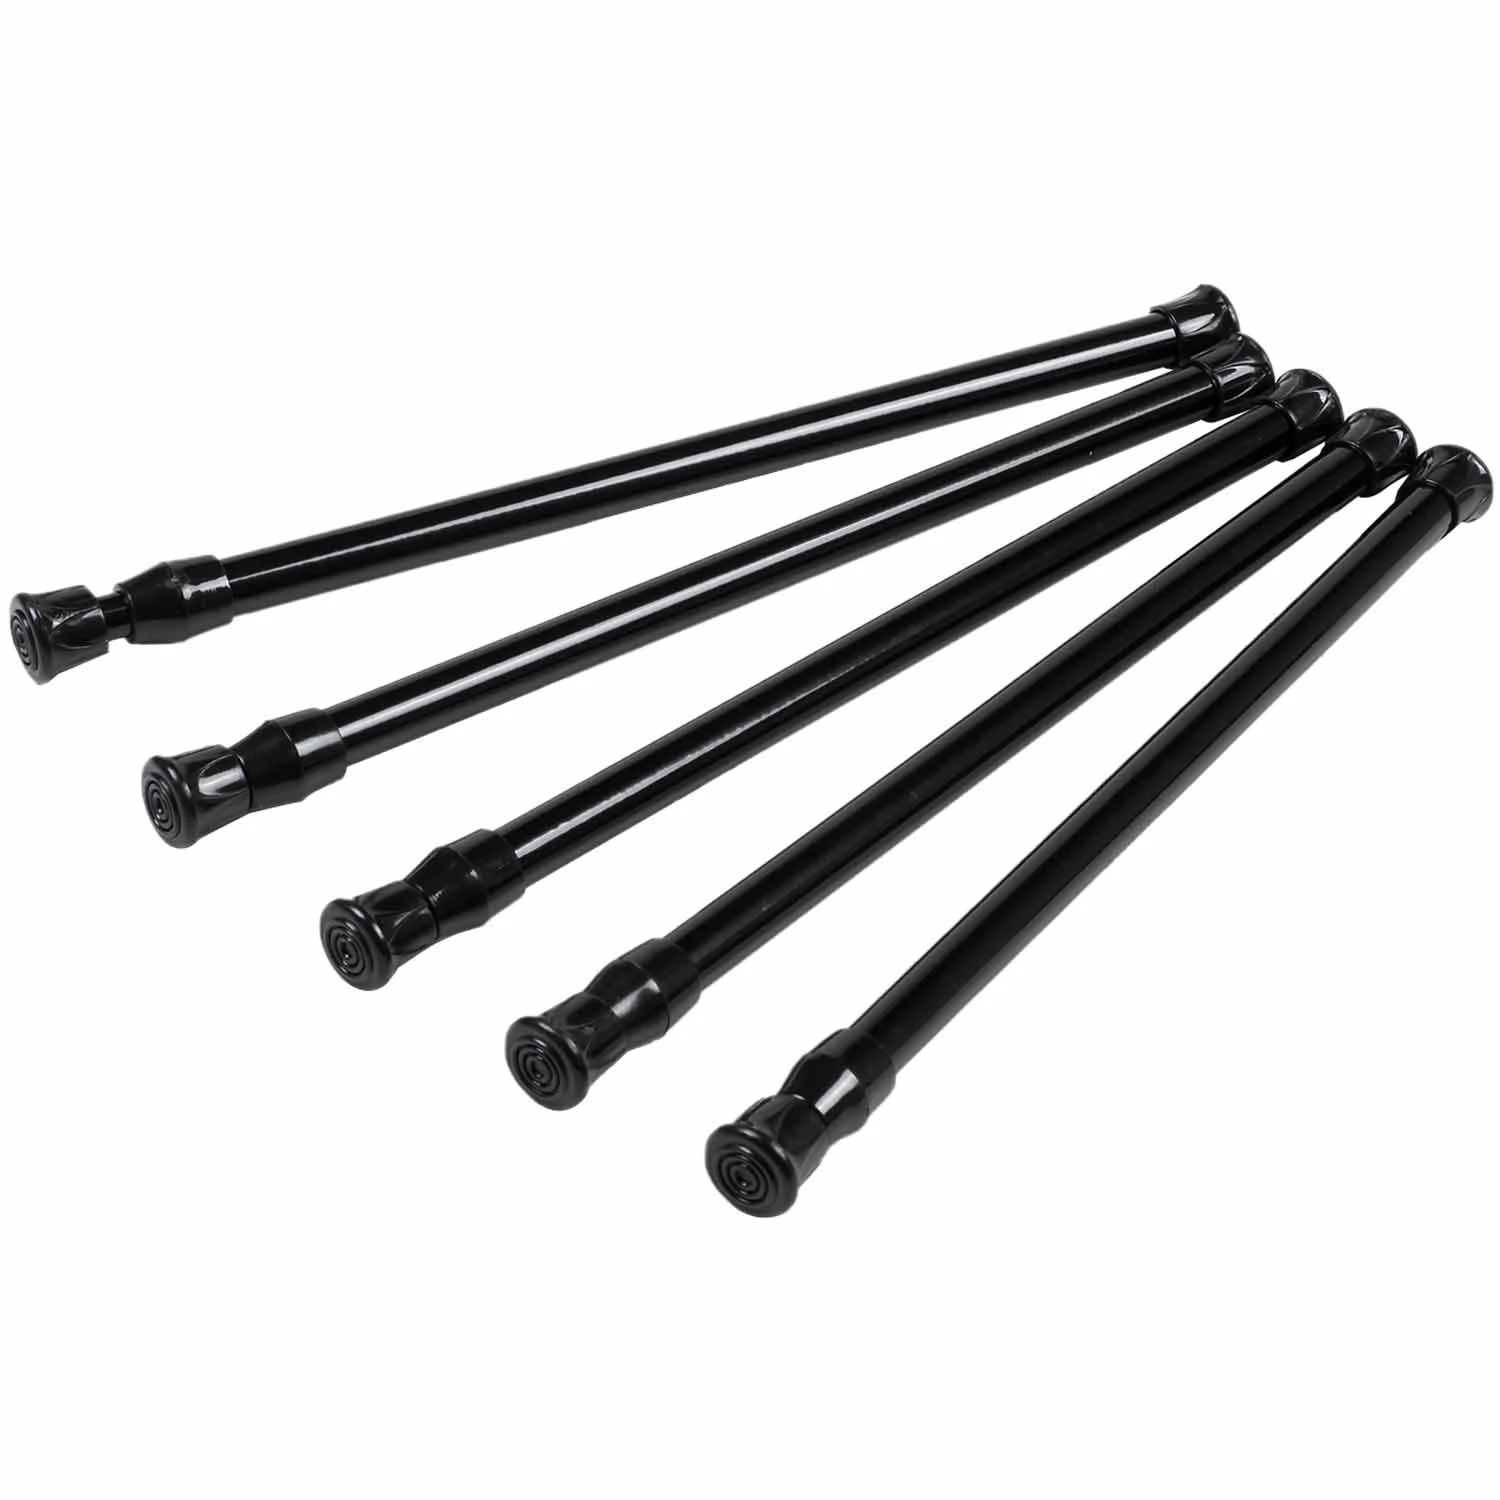 

5 Pack Cupboard Bars Tensions Rod Spring Curtain Rod for DIY Projects, Extendable Width, 11.81 to 20 Inches (Black)